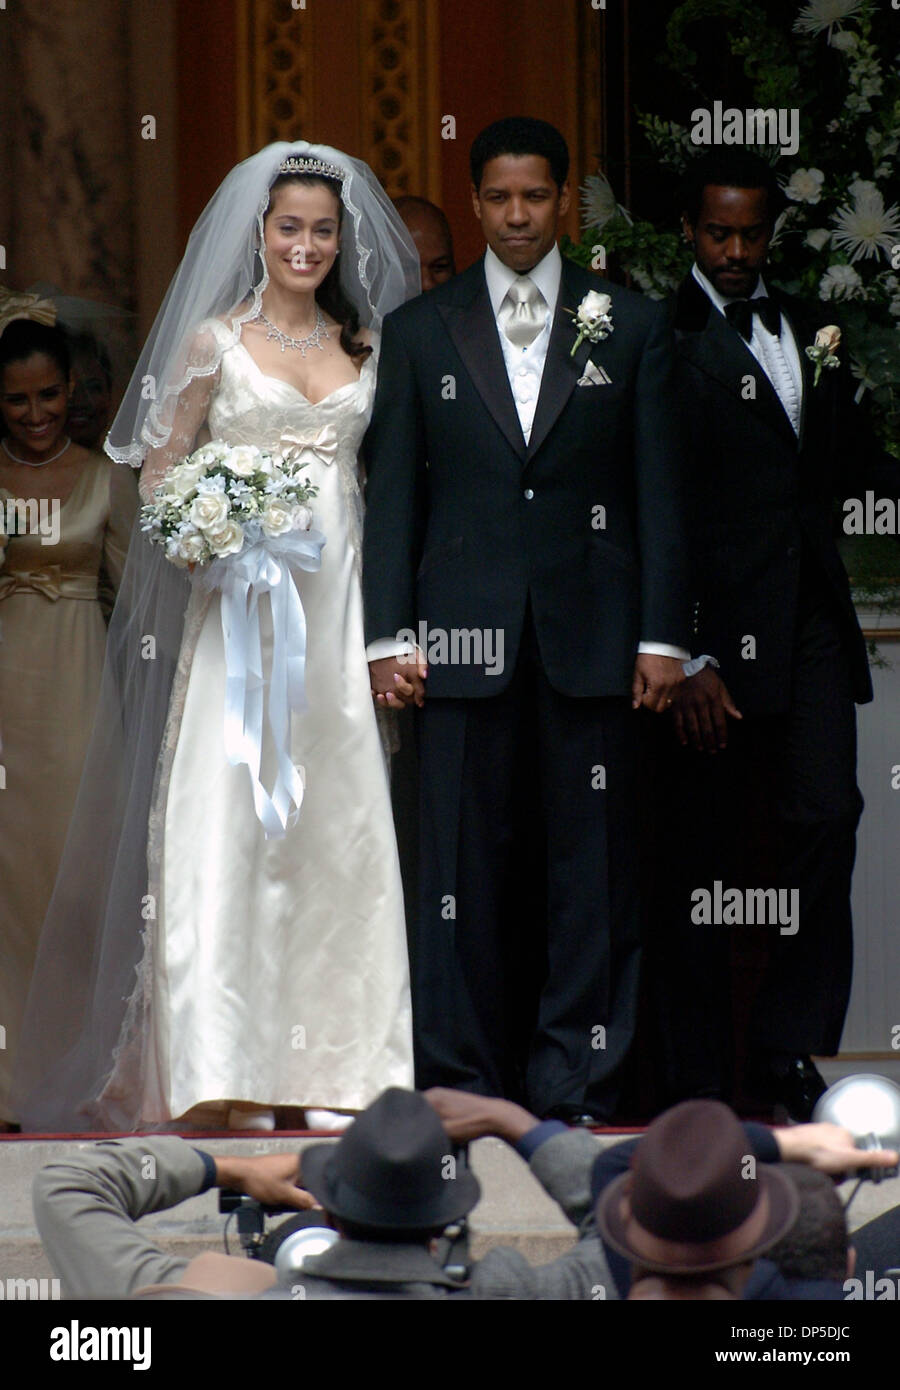 Sep 13, 2006; Manhattan, NY, USA; Actors DENZEL WASHINGTON and LYMARI NADAL film a wedding scene on the steps of Mt. OIivet Baptist Church in Harlem from the upcoming film 'American Gangster,' based on the true story of a Harlem drug dealer. Denzel Washington plays Frank Lucas, a.k.a 'Superfly' who smuggled heroin out of Southeast Asia in the caskets of soldiers killed in Vietnam.  Stock Photo